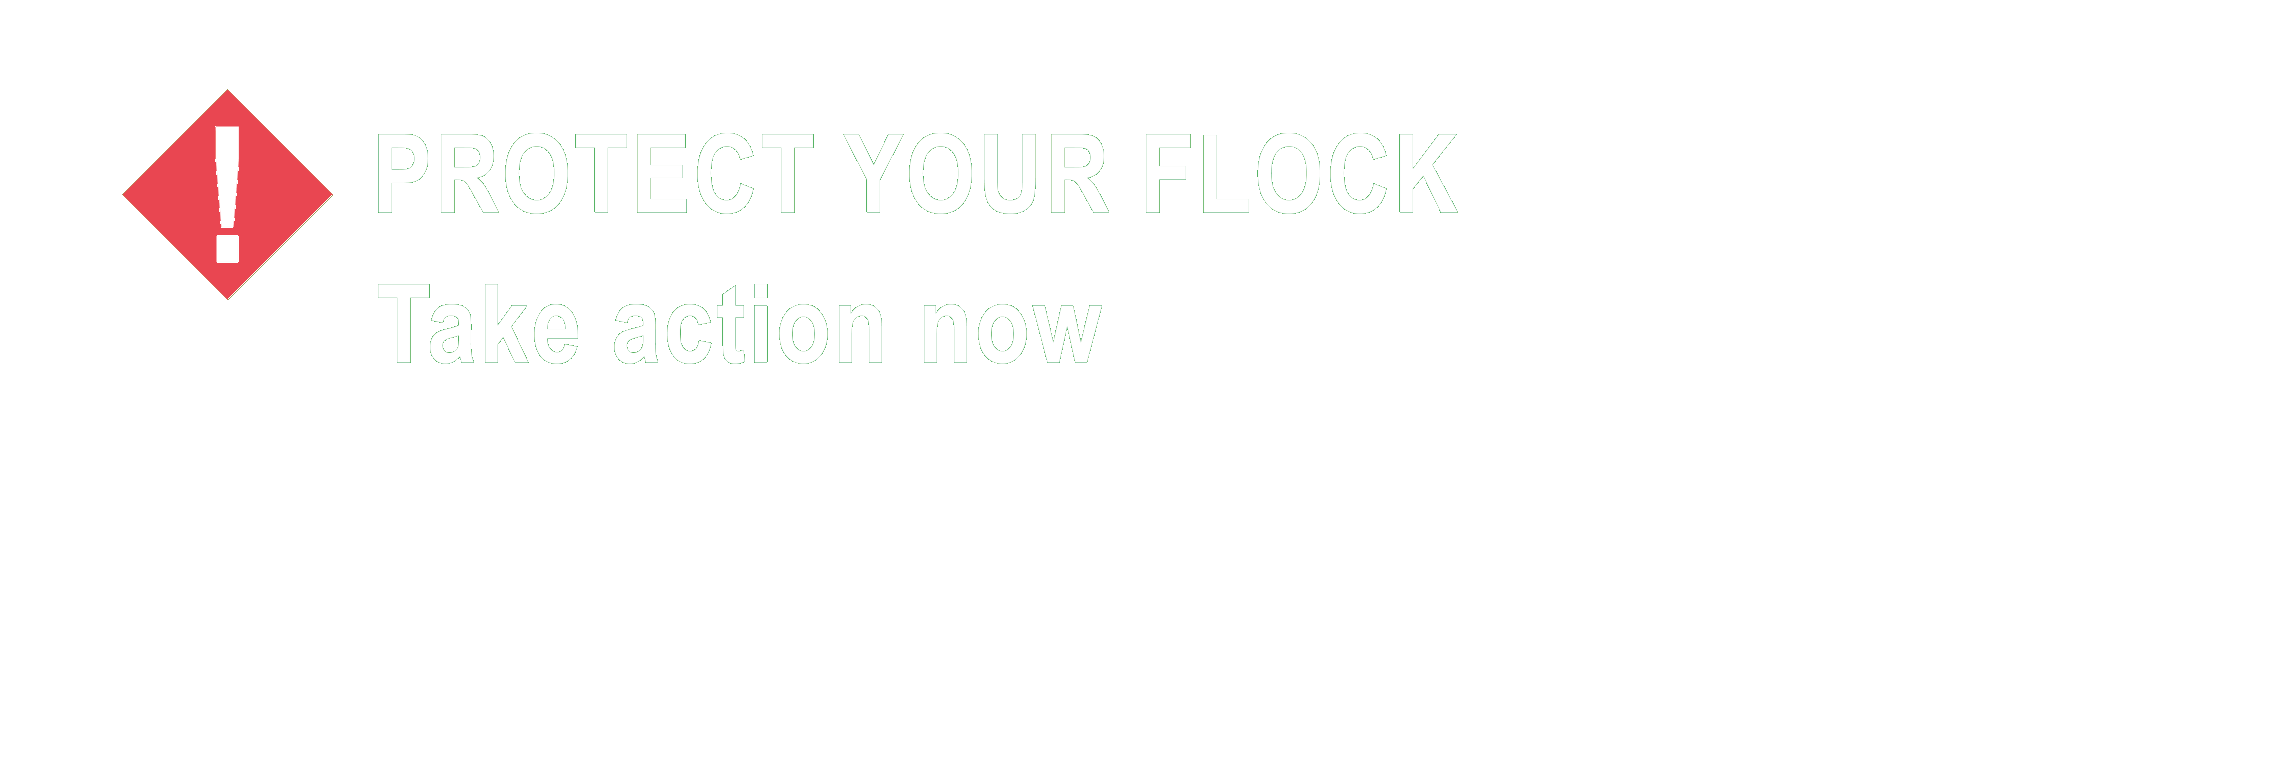 Protect your Flock Webinair - Take action now